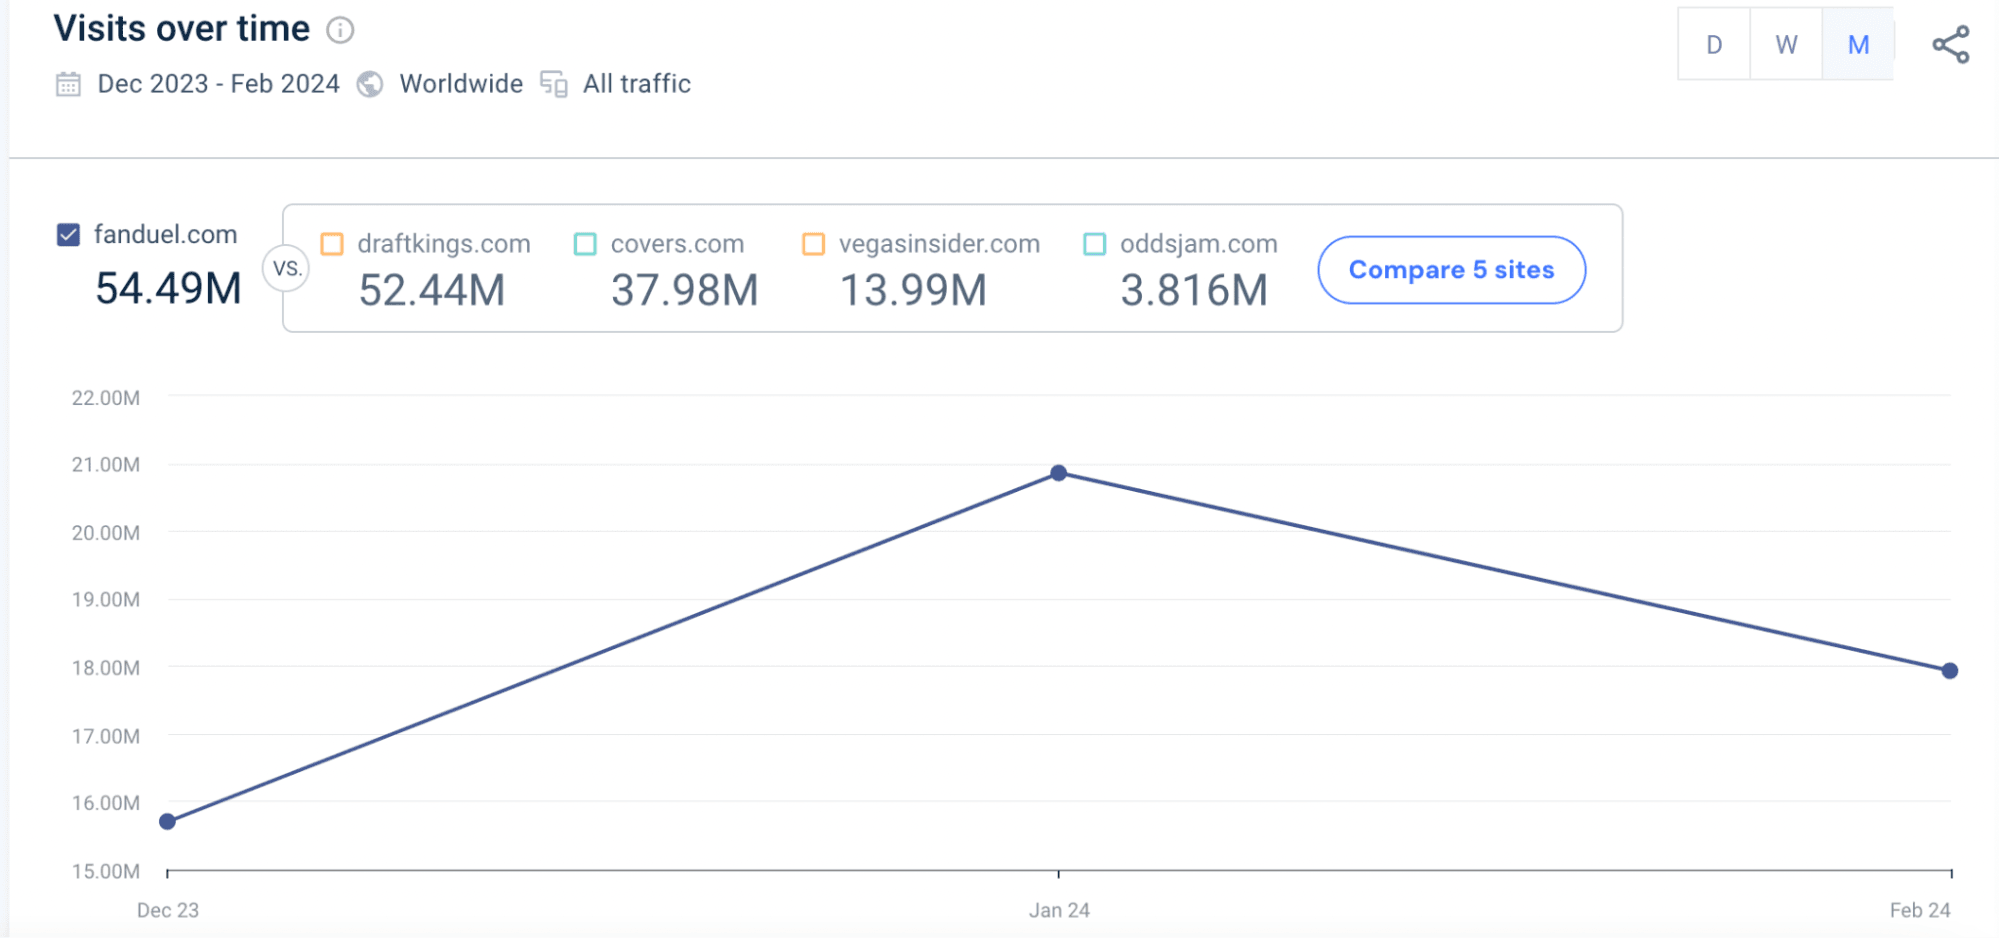 fanduel monthly visits from similarweb - image25.png